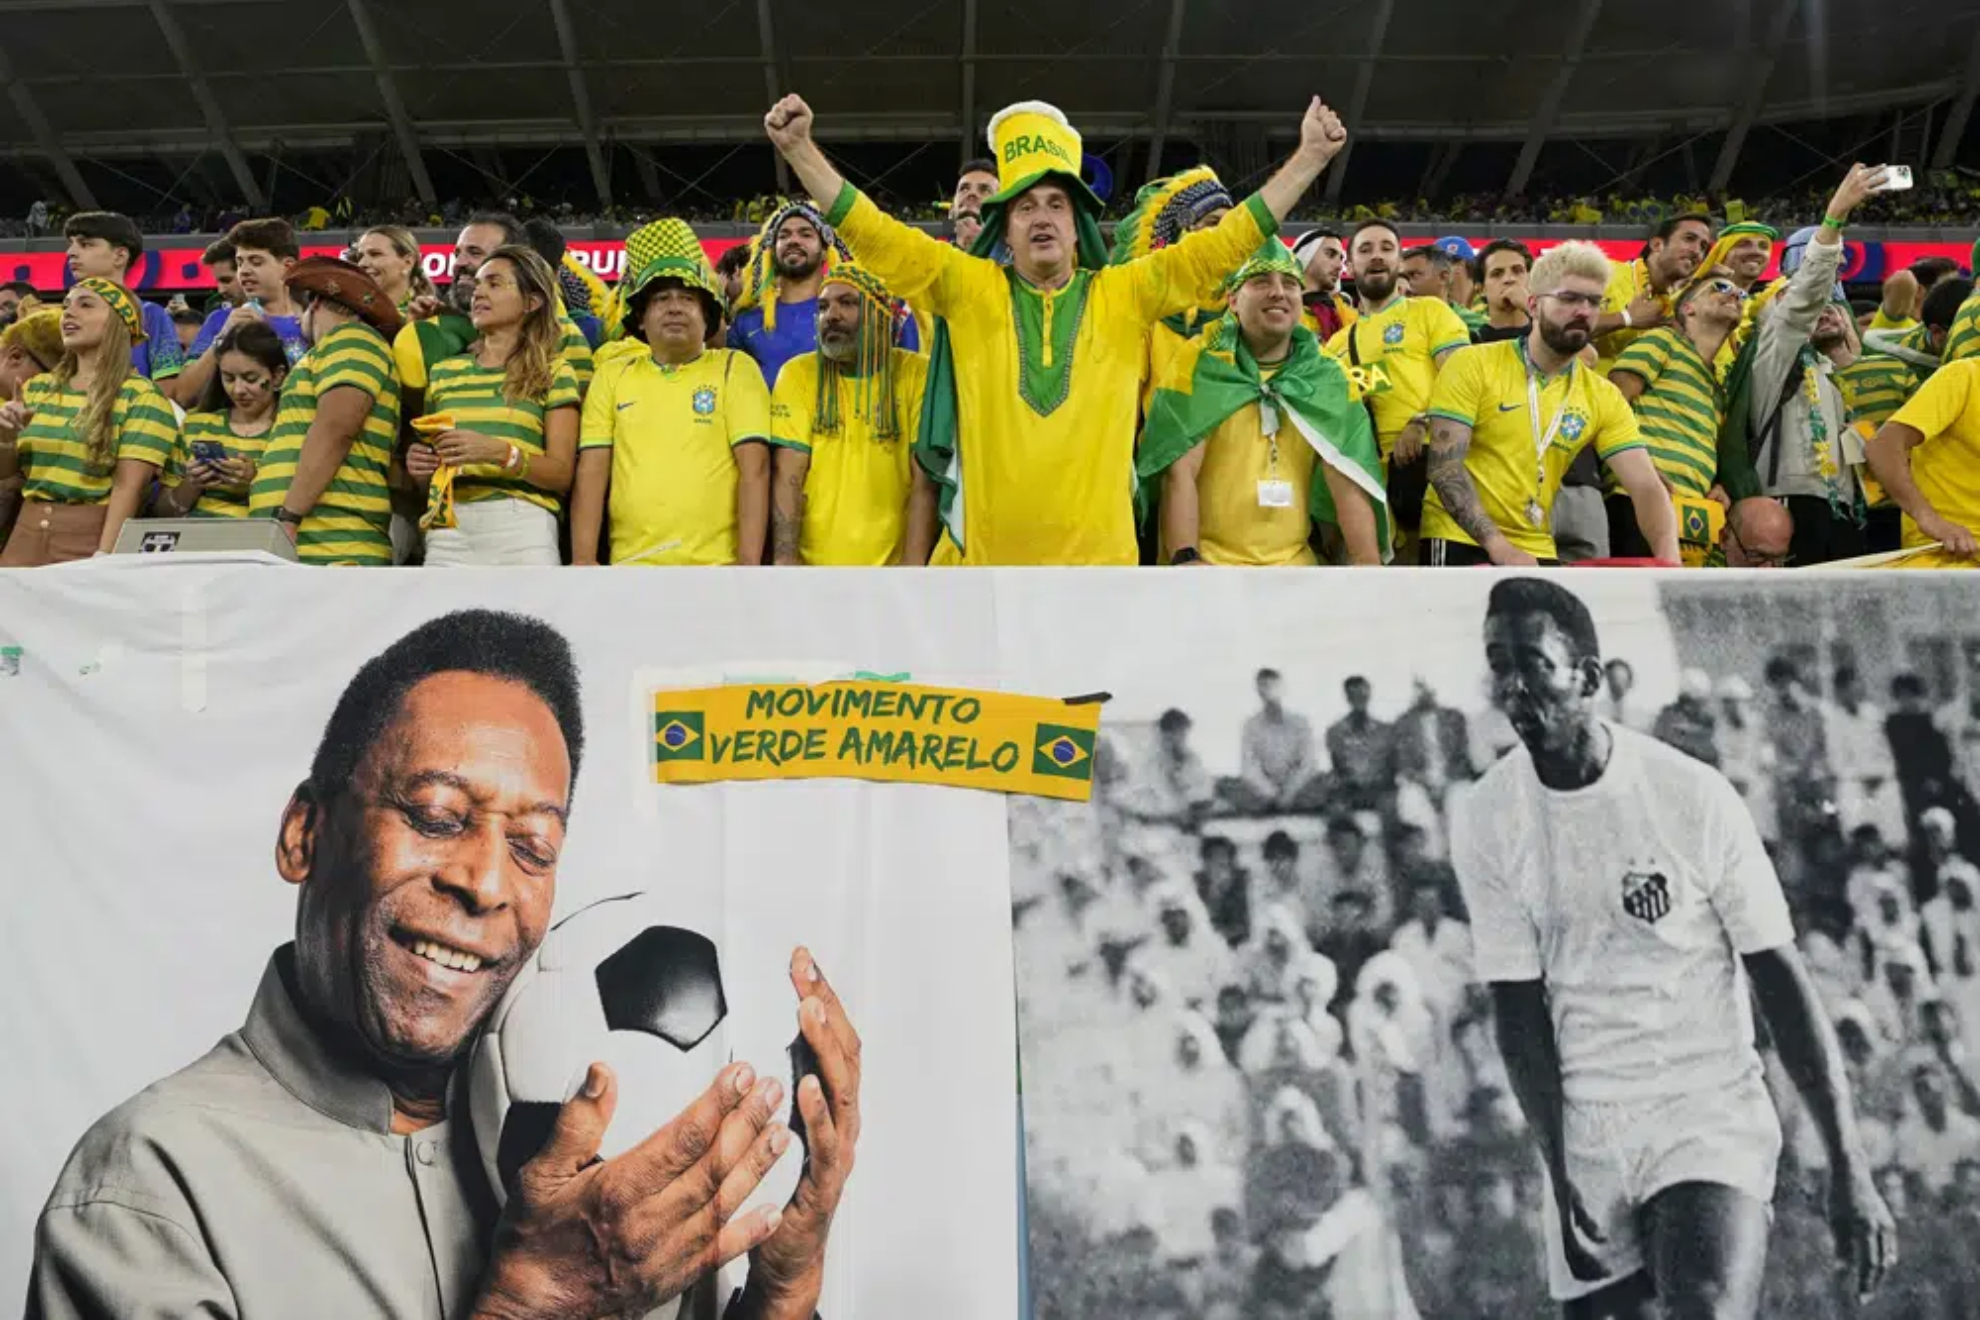 Pelé's health shows no sign of improvement as he nears one month hospitalized in Brazil